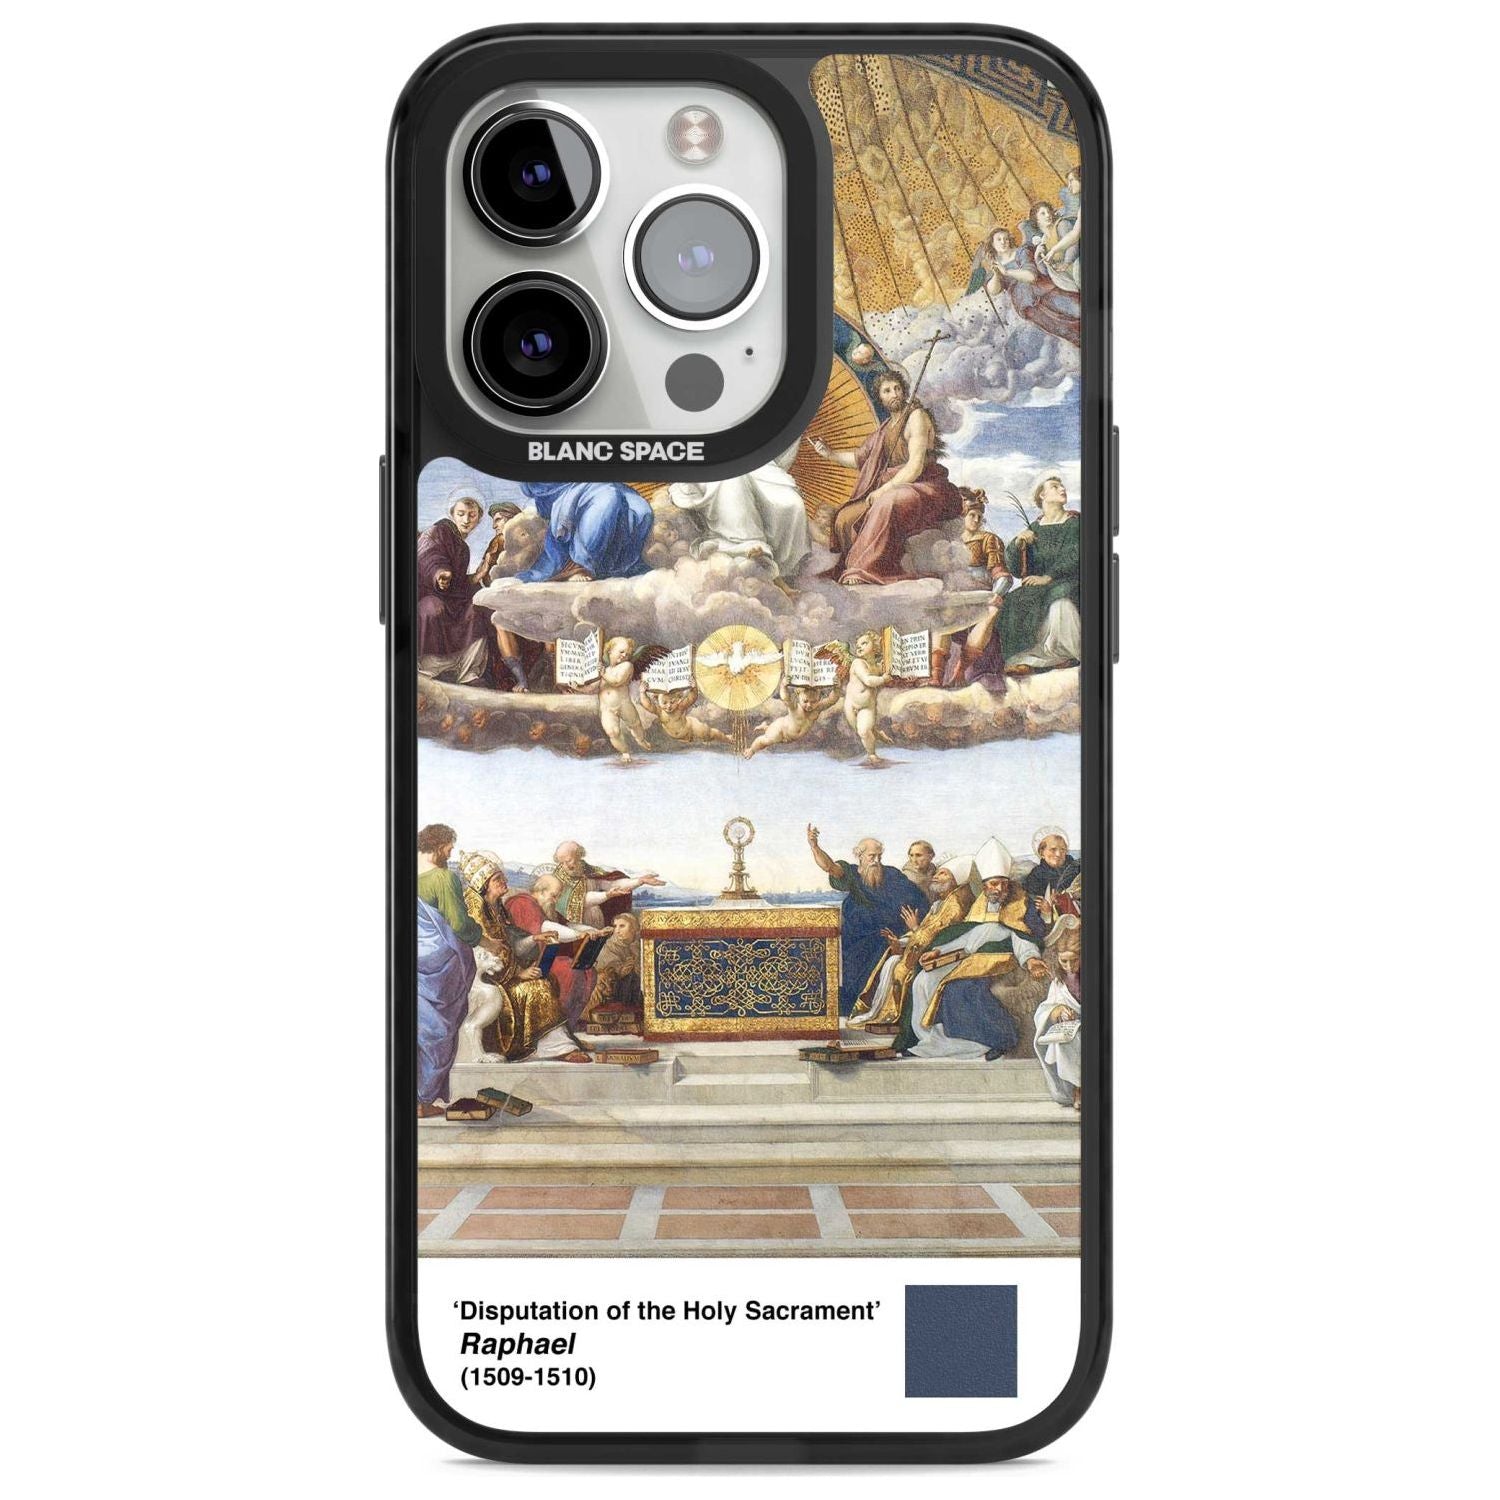 Disputation of the Holy Sacrament Phone Case iPhone 15 Pro Max / Magsafe Black Impact Case,iPhone 15 Pro / Magsafe Black Impact Case,iPhone 14 Pro Max / Magsafe Black Impact Case,iPhone 14 Pro / Magsafe Black Impact Case,iPhone 13 Pro / Magsafe Black Impact Case Blanc Space